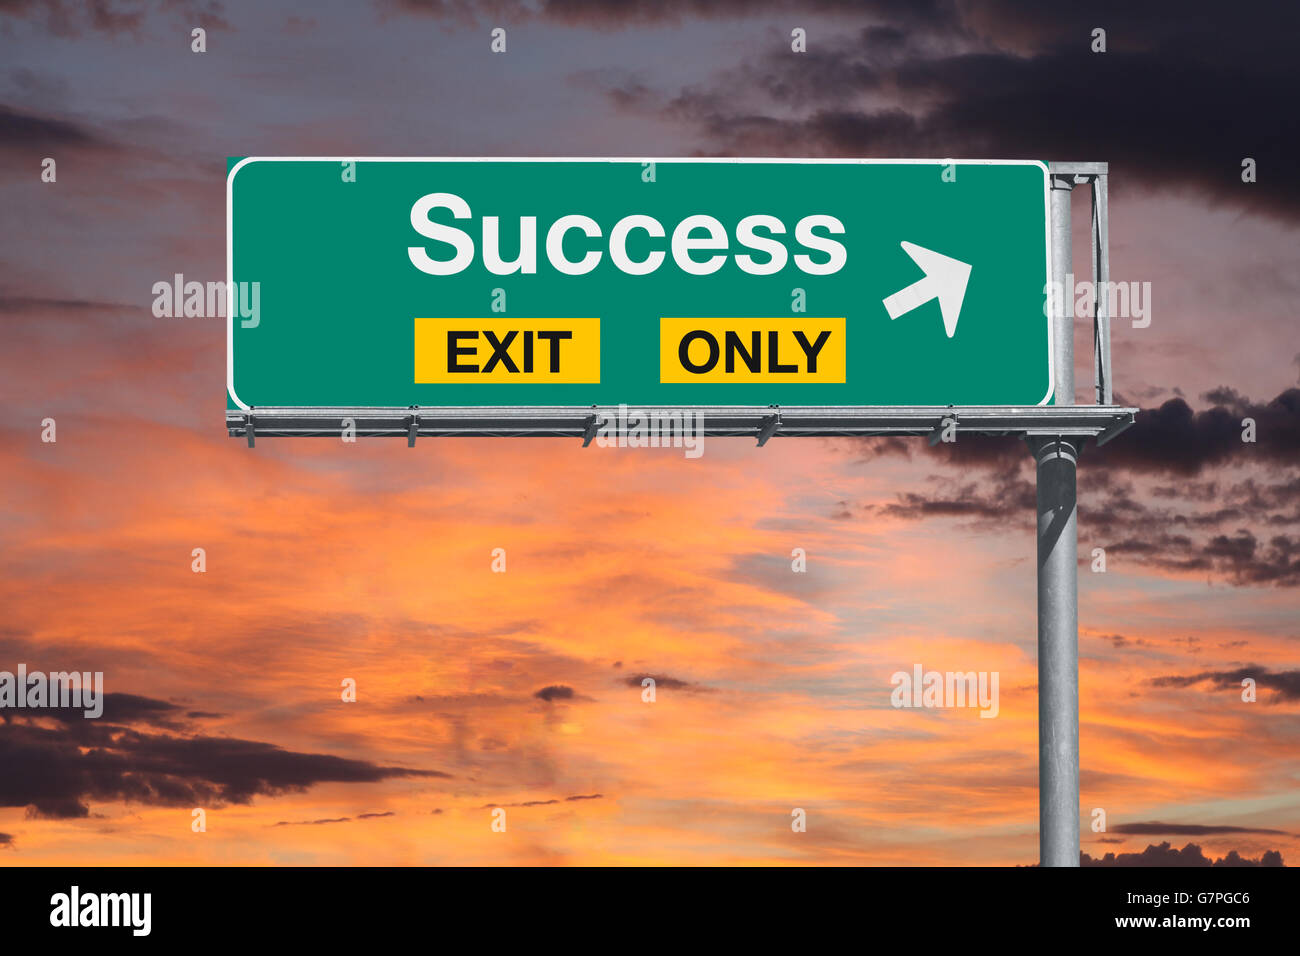 Success exit only highway sign with sunrise sky. Stock Photo